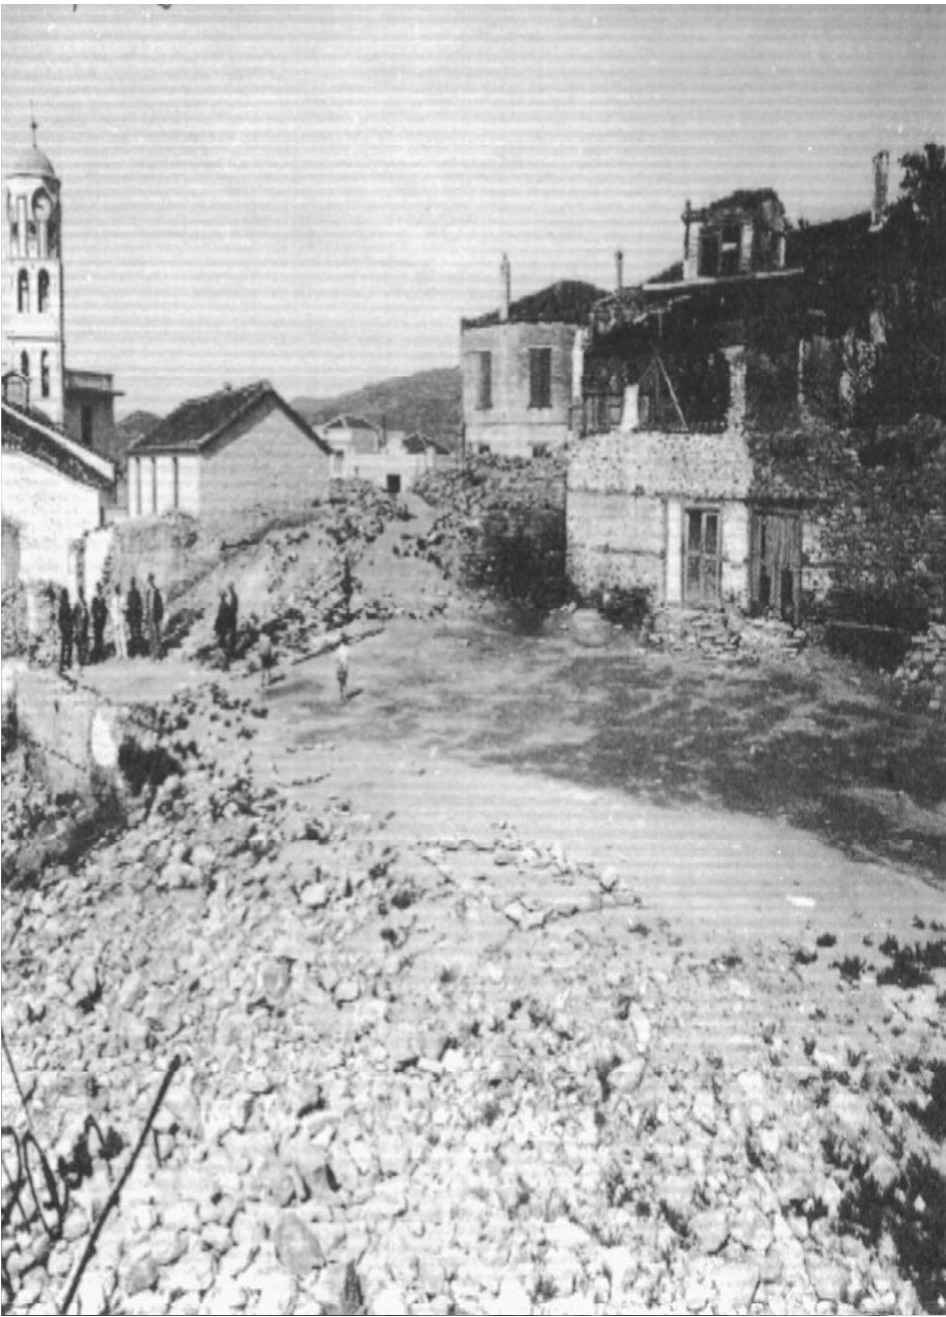 The land and the houses before their expropriation and the constructions of 1930-1933 that created the Mohammed Ali's square. Kavala, c. 1930. ELIA Archive